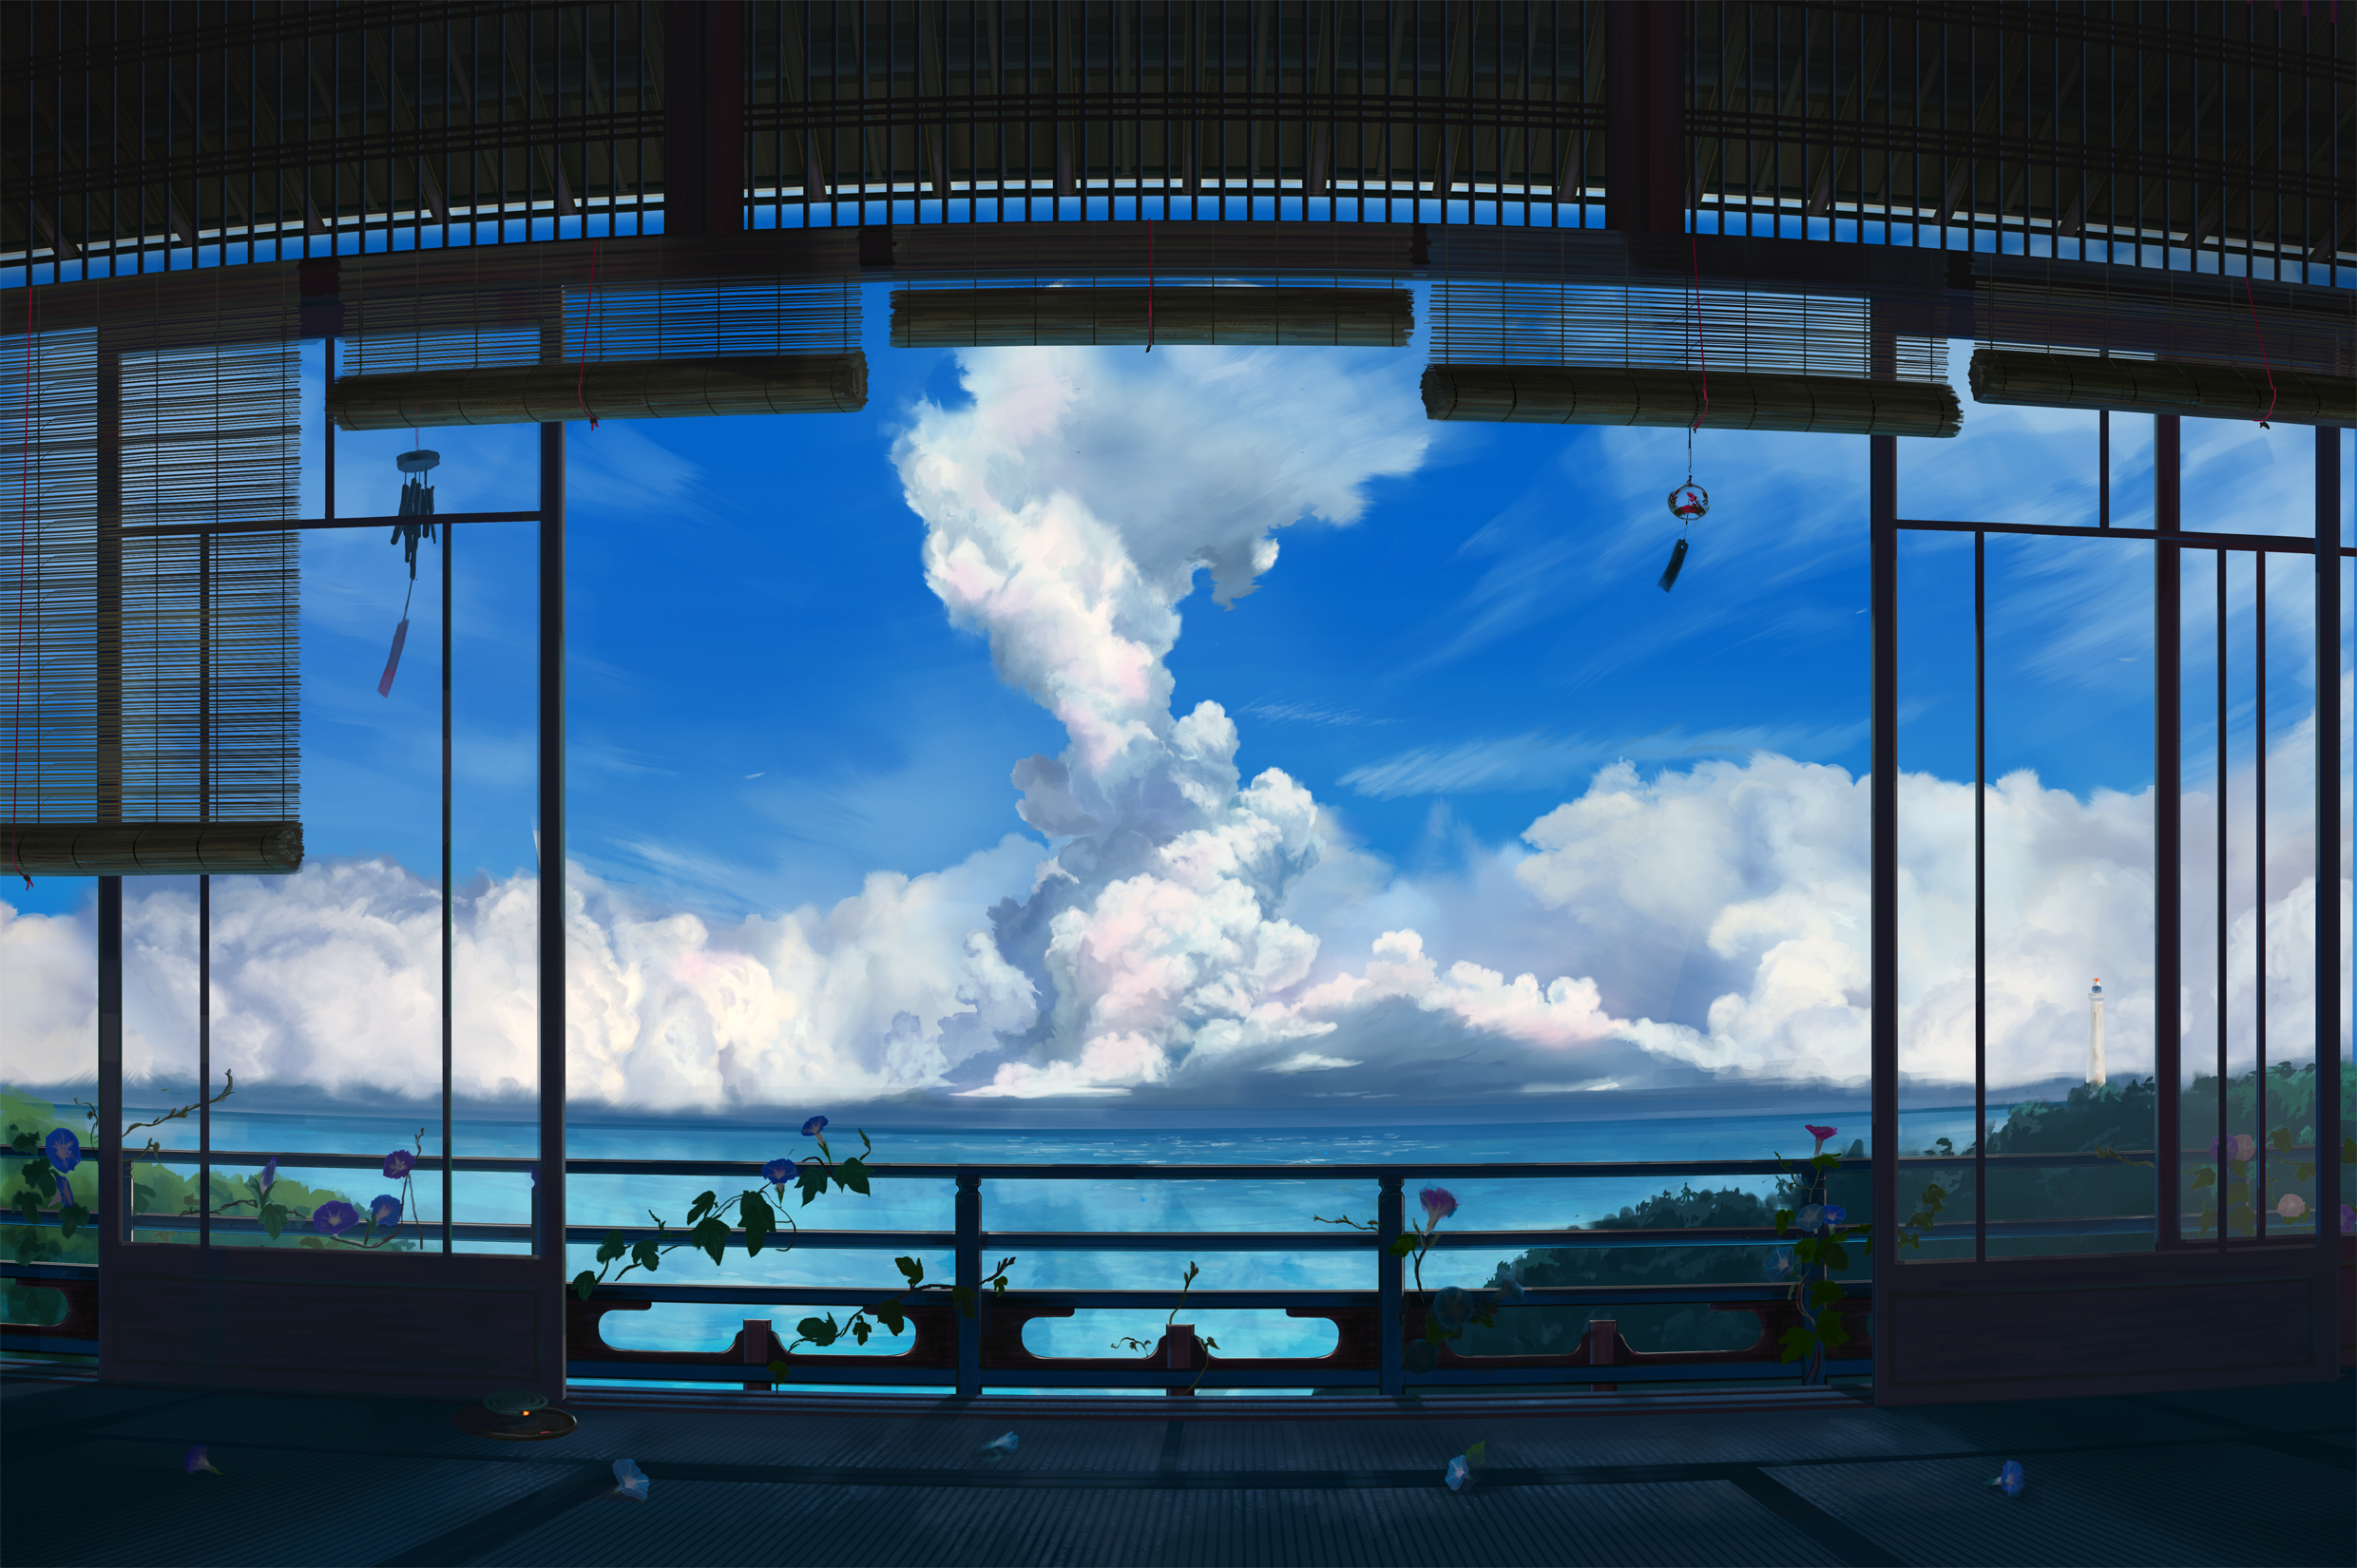 Anime 2480x1650 anime clouds landscape sky artwork nature house room indoors doorways wind chimes lighthouse